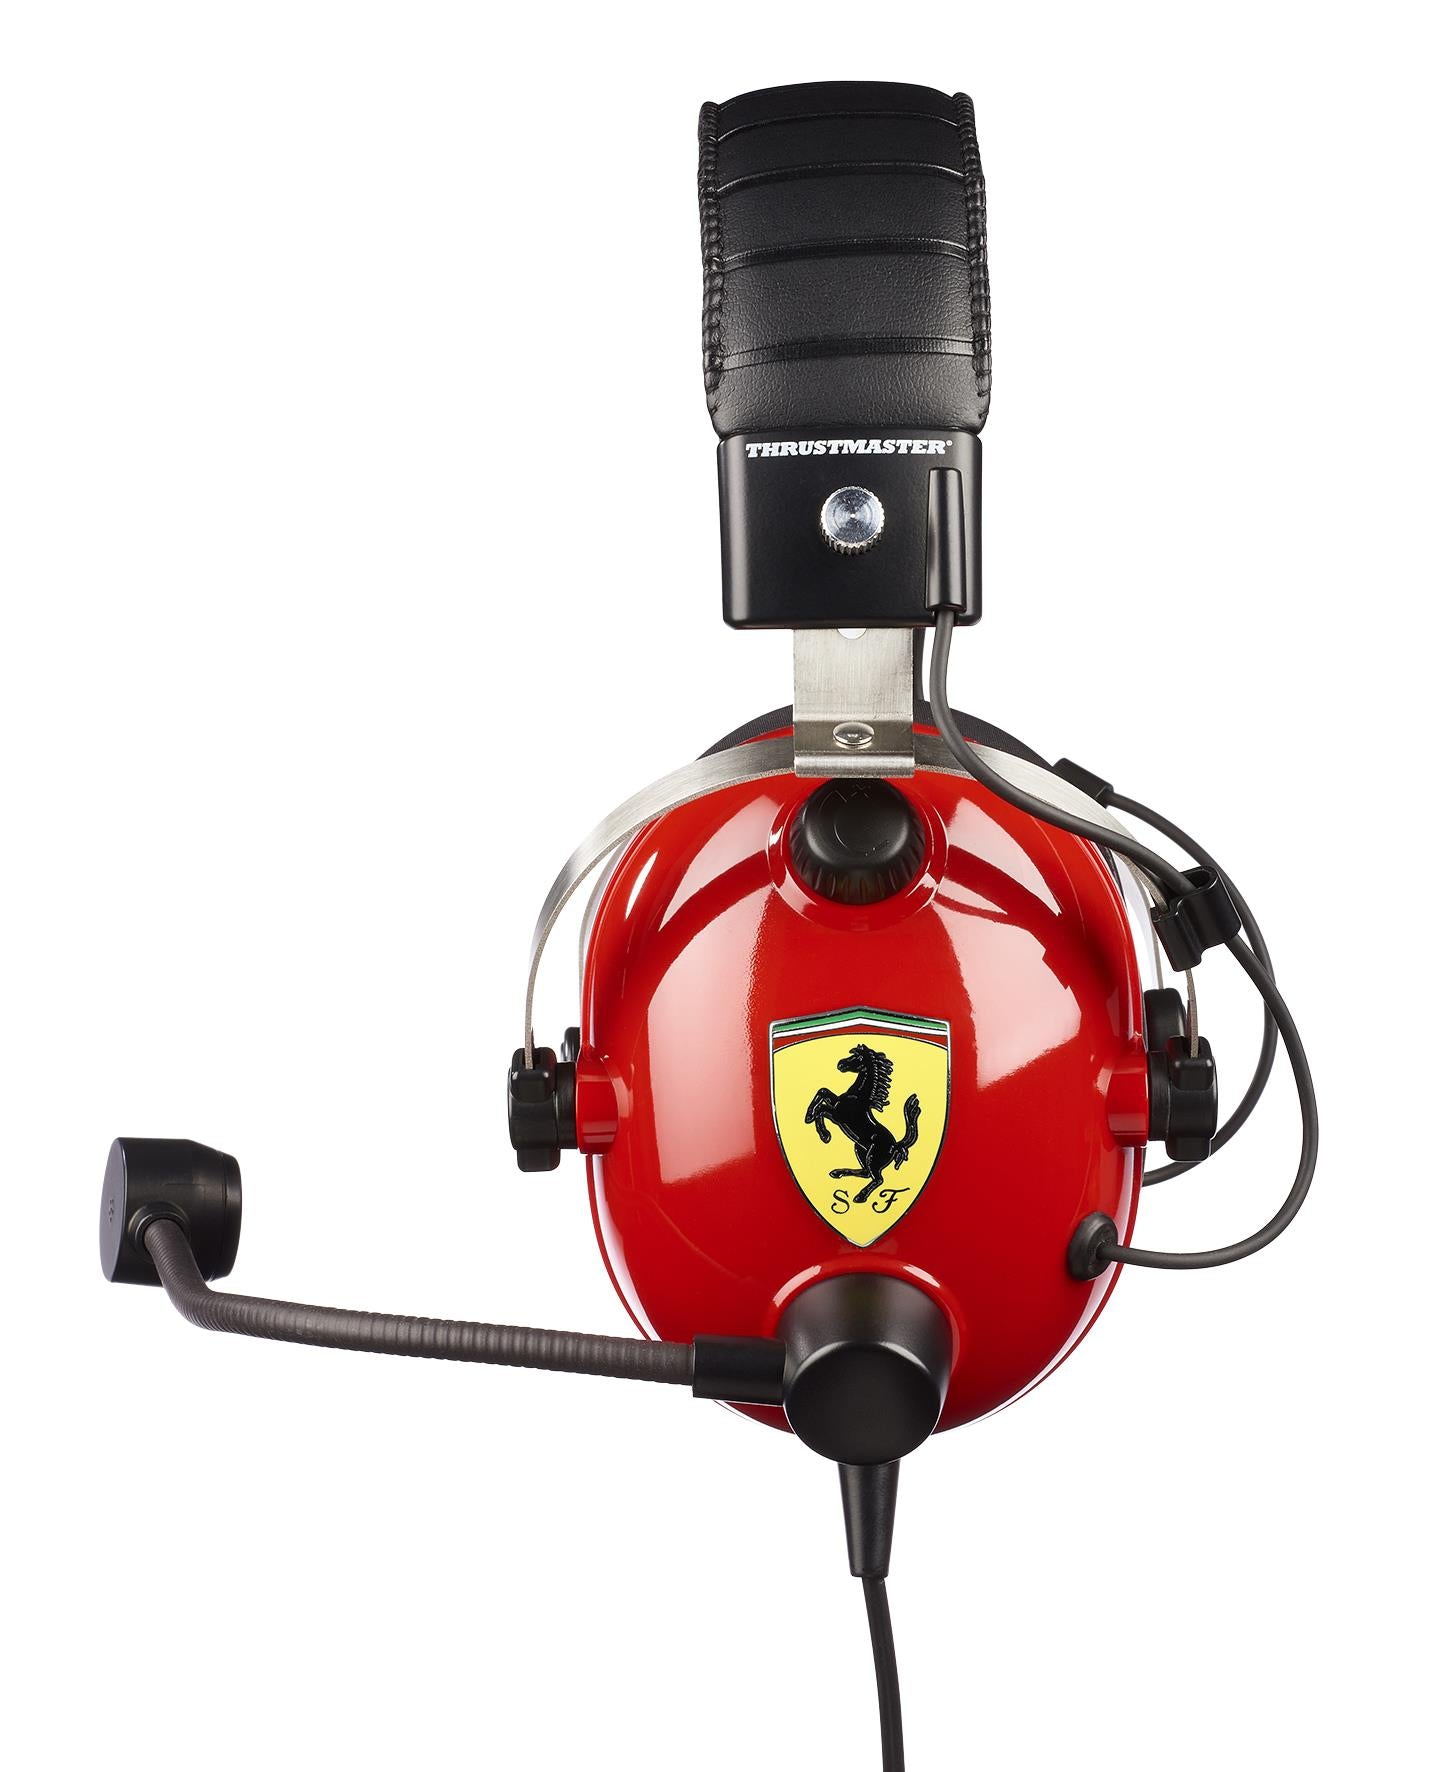 Thrustmaster T.Racing Gaming Headset Scuderia Ferrari Edition for PS4, Xbox One & PC